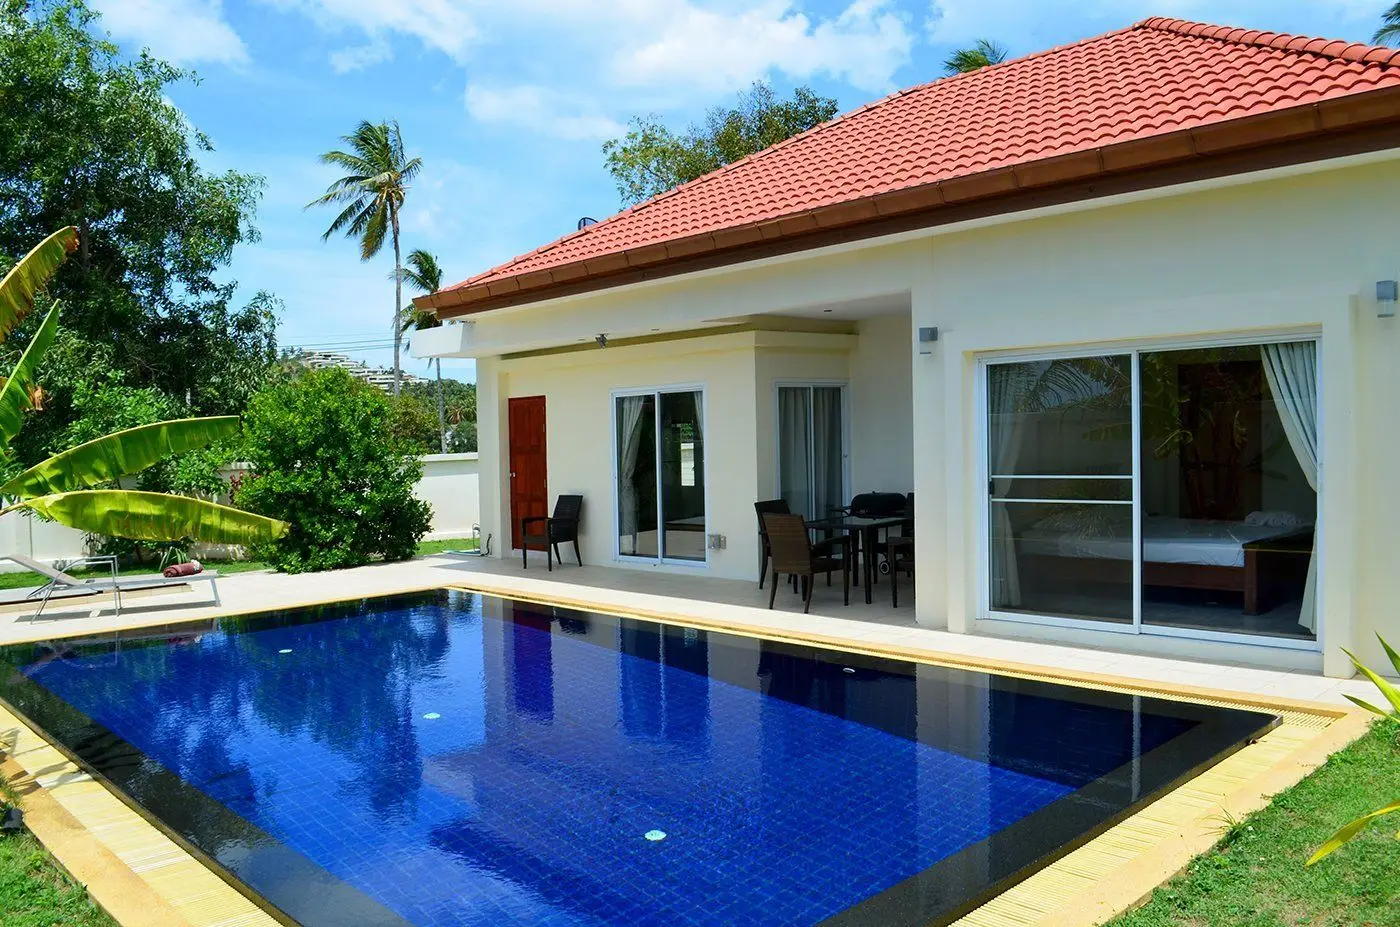 Two Bedroom Villa 5 Minutes Walk to the Beach.